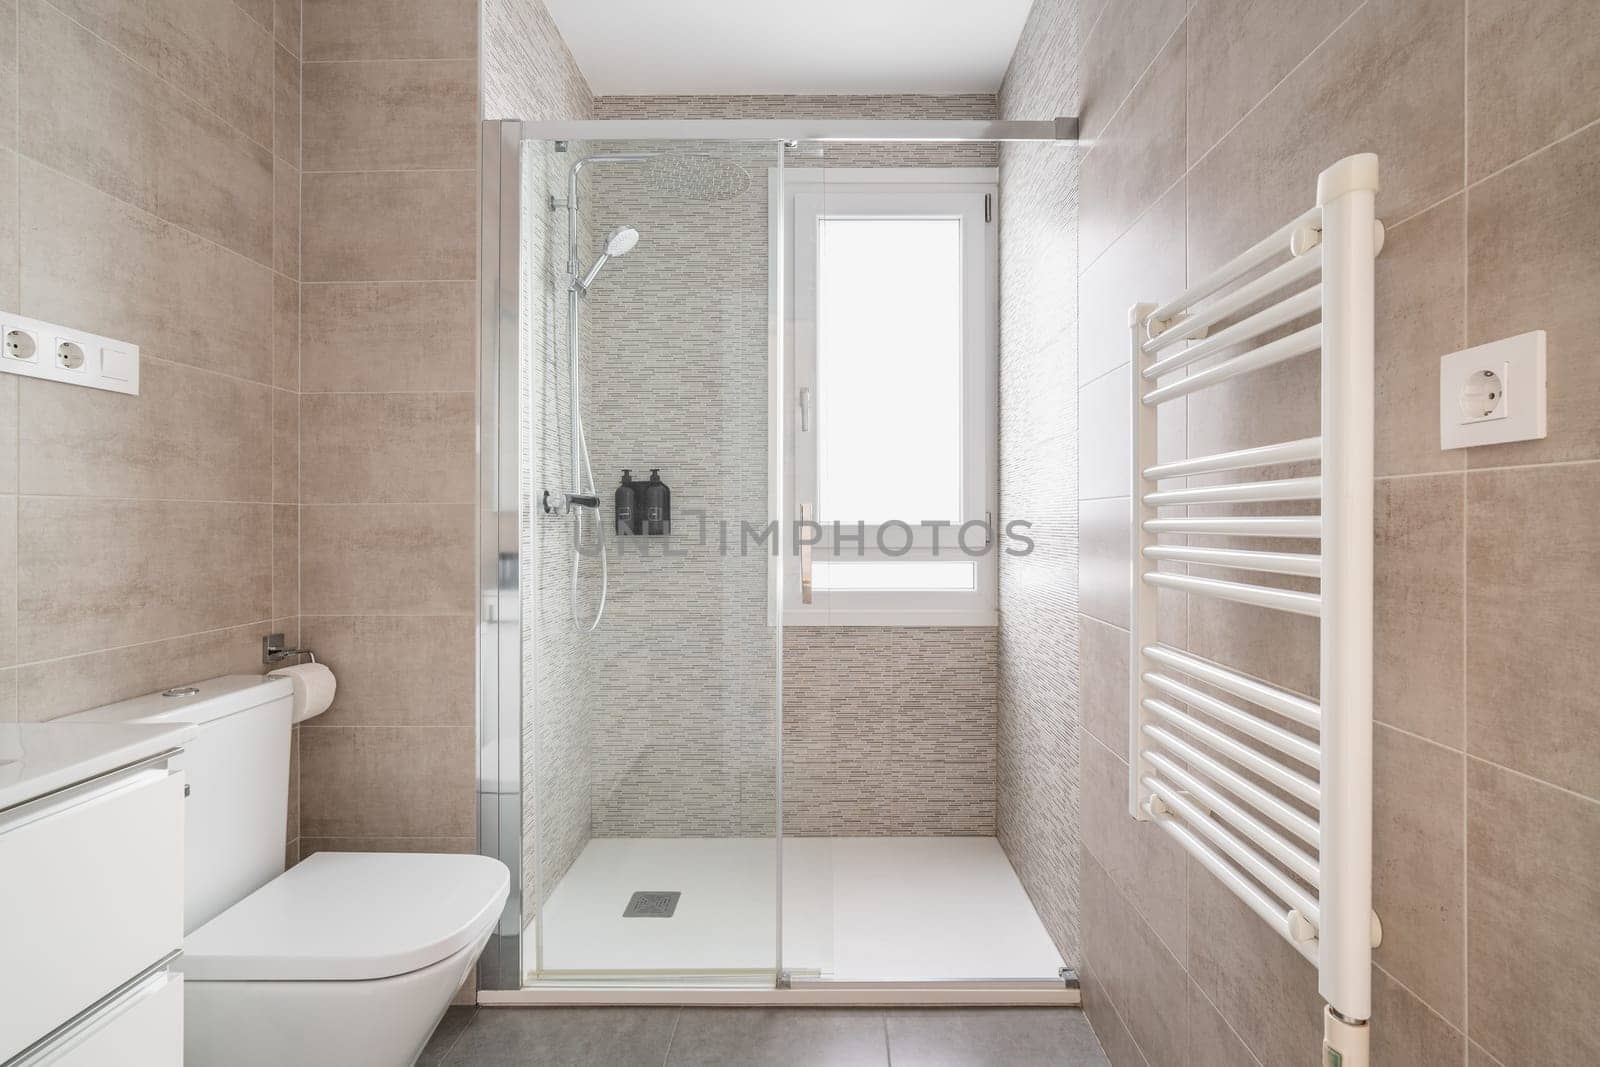 Comfortable bathroom with a toilet bowl and a shower cabin with tiles in beige tones and a window for natural light. The concept of a bathroom in a hotel or apartment after renovation.